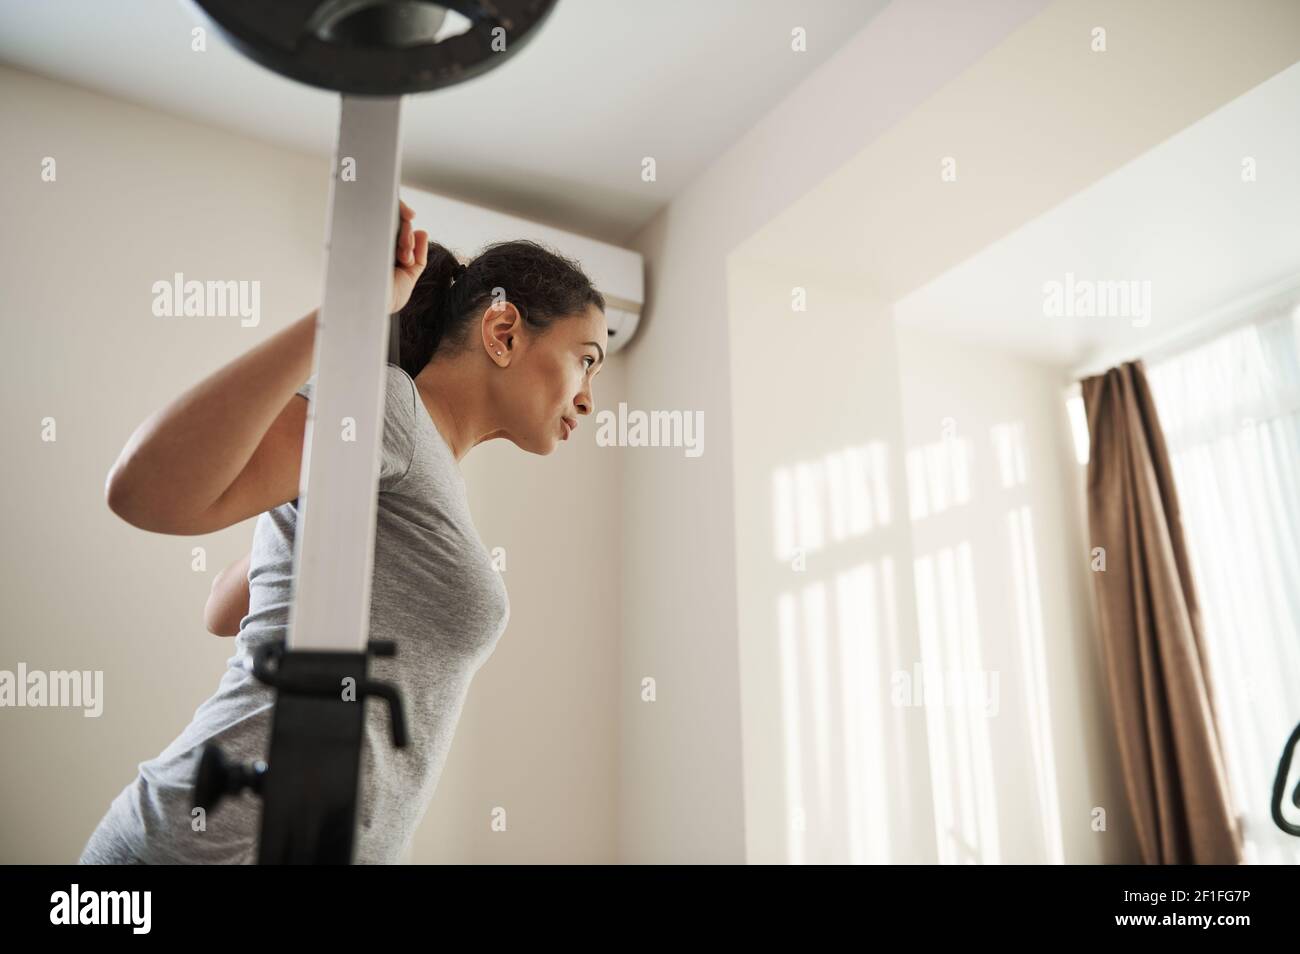 Side portrait of young brunette woman practicing barbell squat at home gym. Concept of Heavy weight training Stock Photo